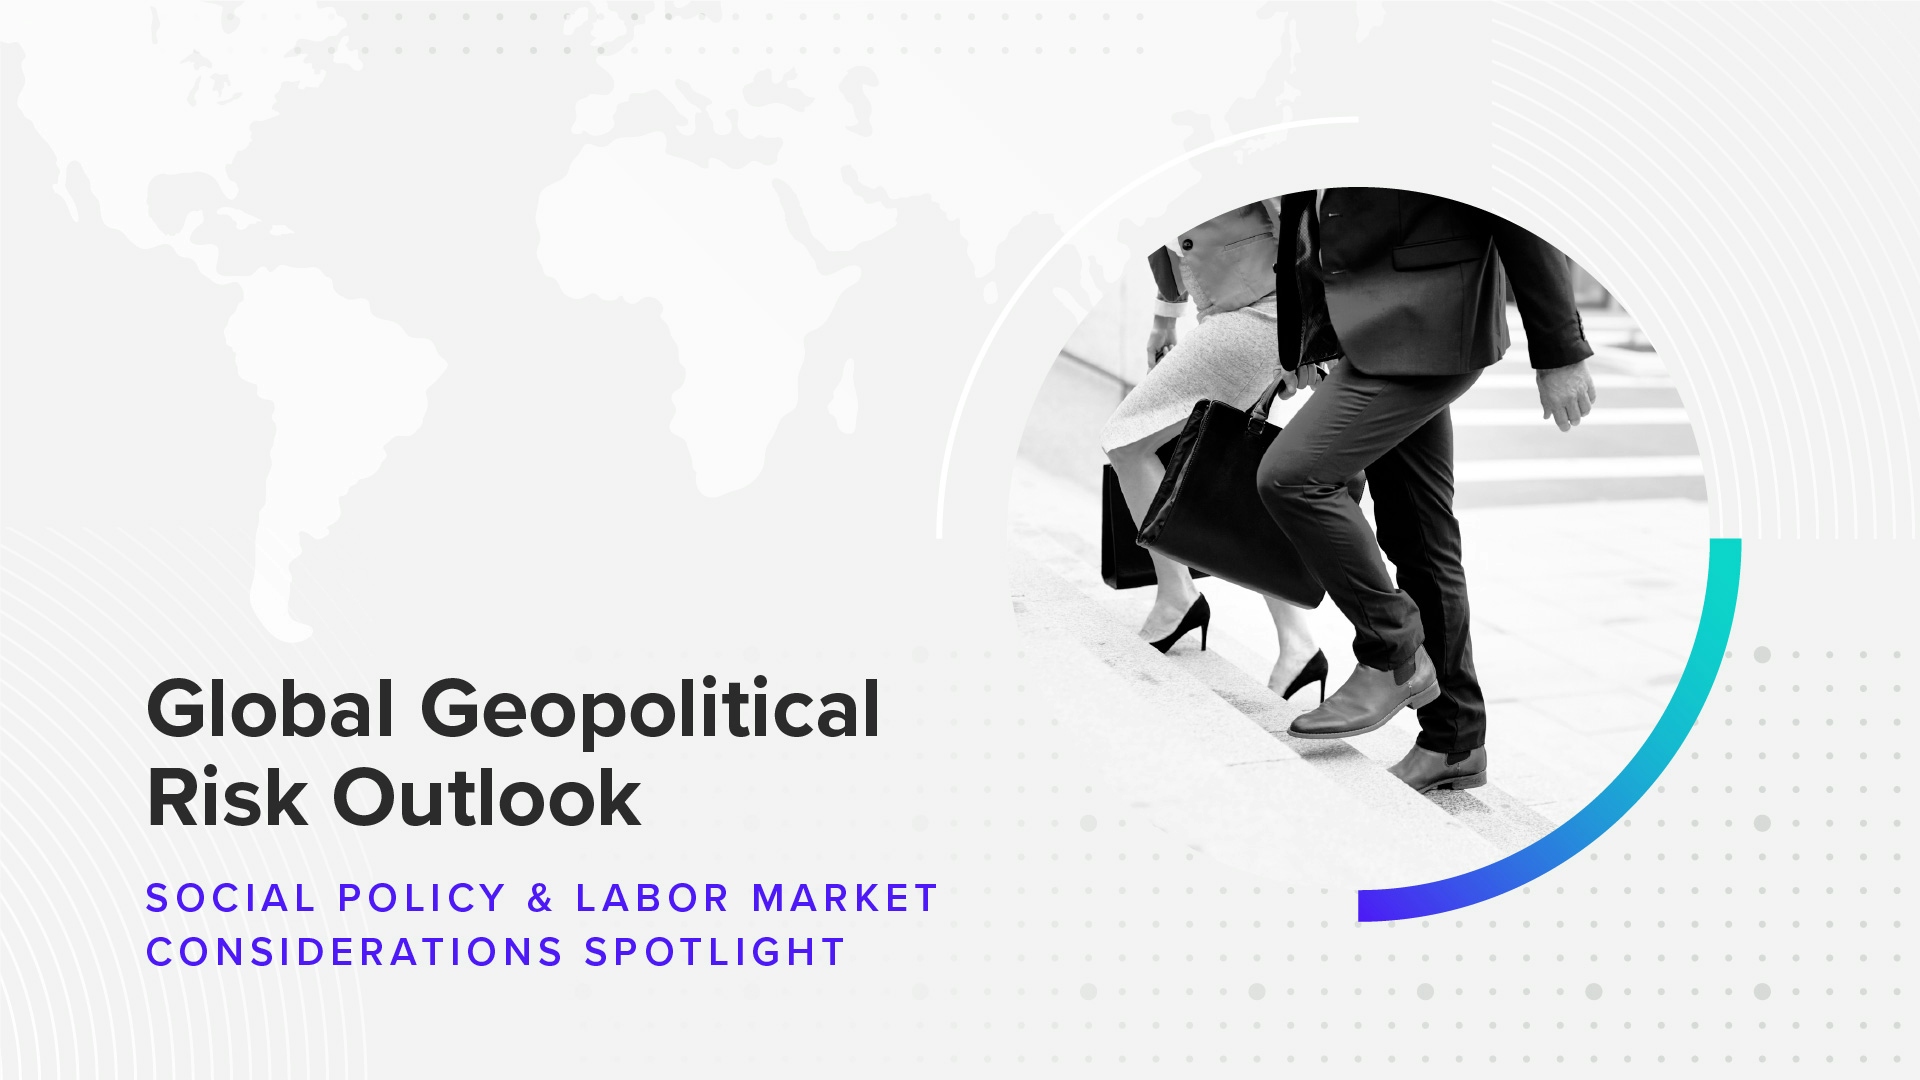 Download the Global Geopolitical Risk Outlook H1 2023 Report: Social Policy & Labor Market Considerations Spotlight